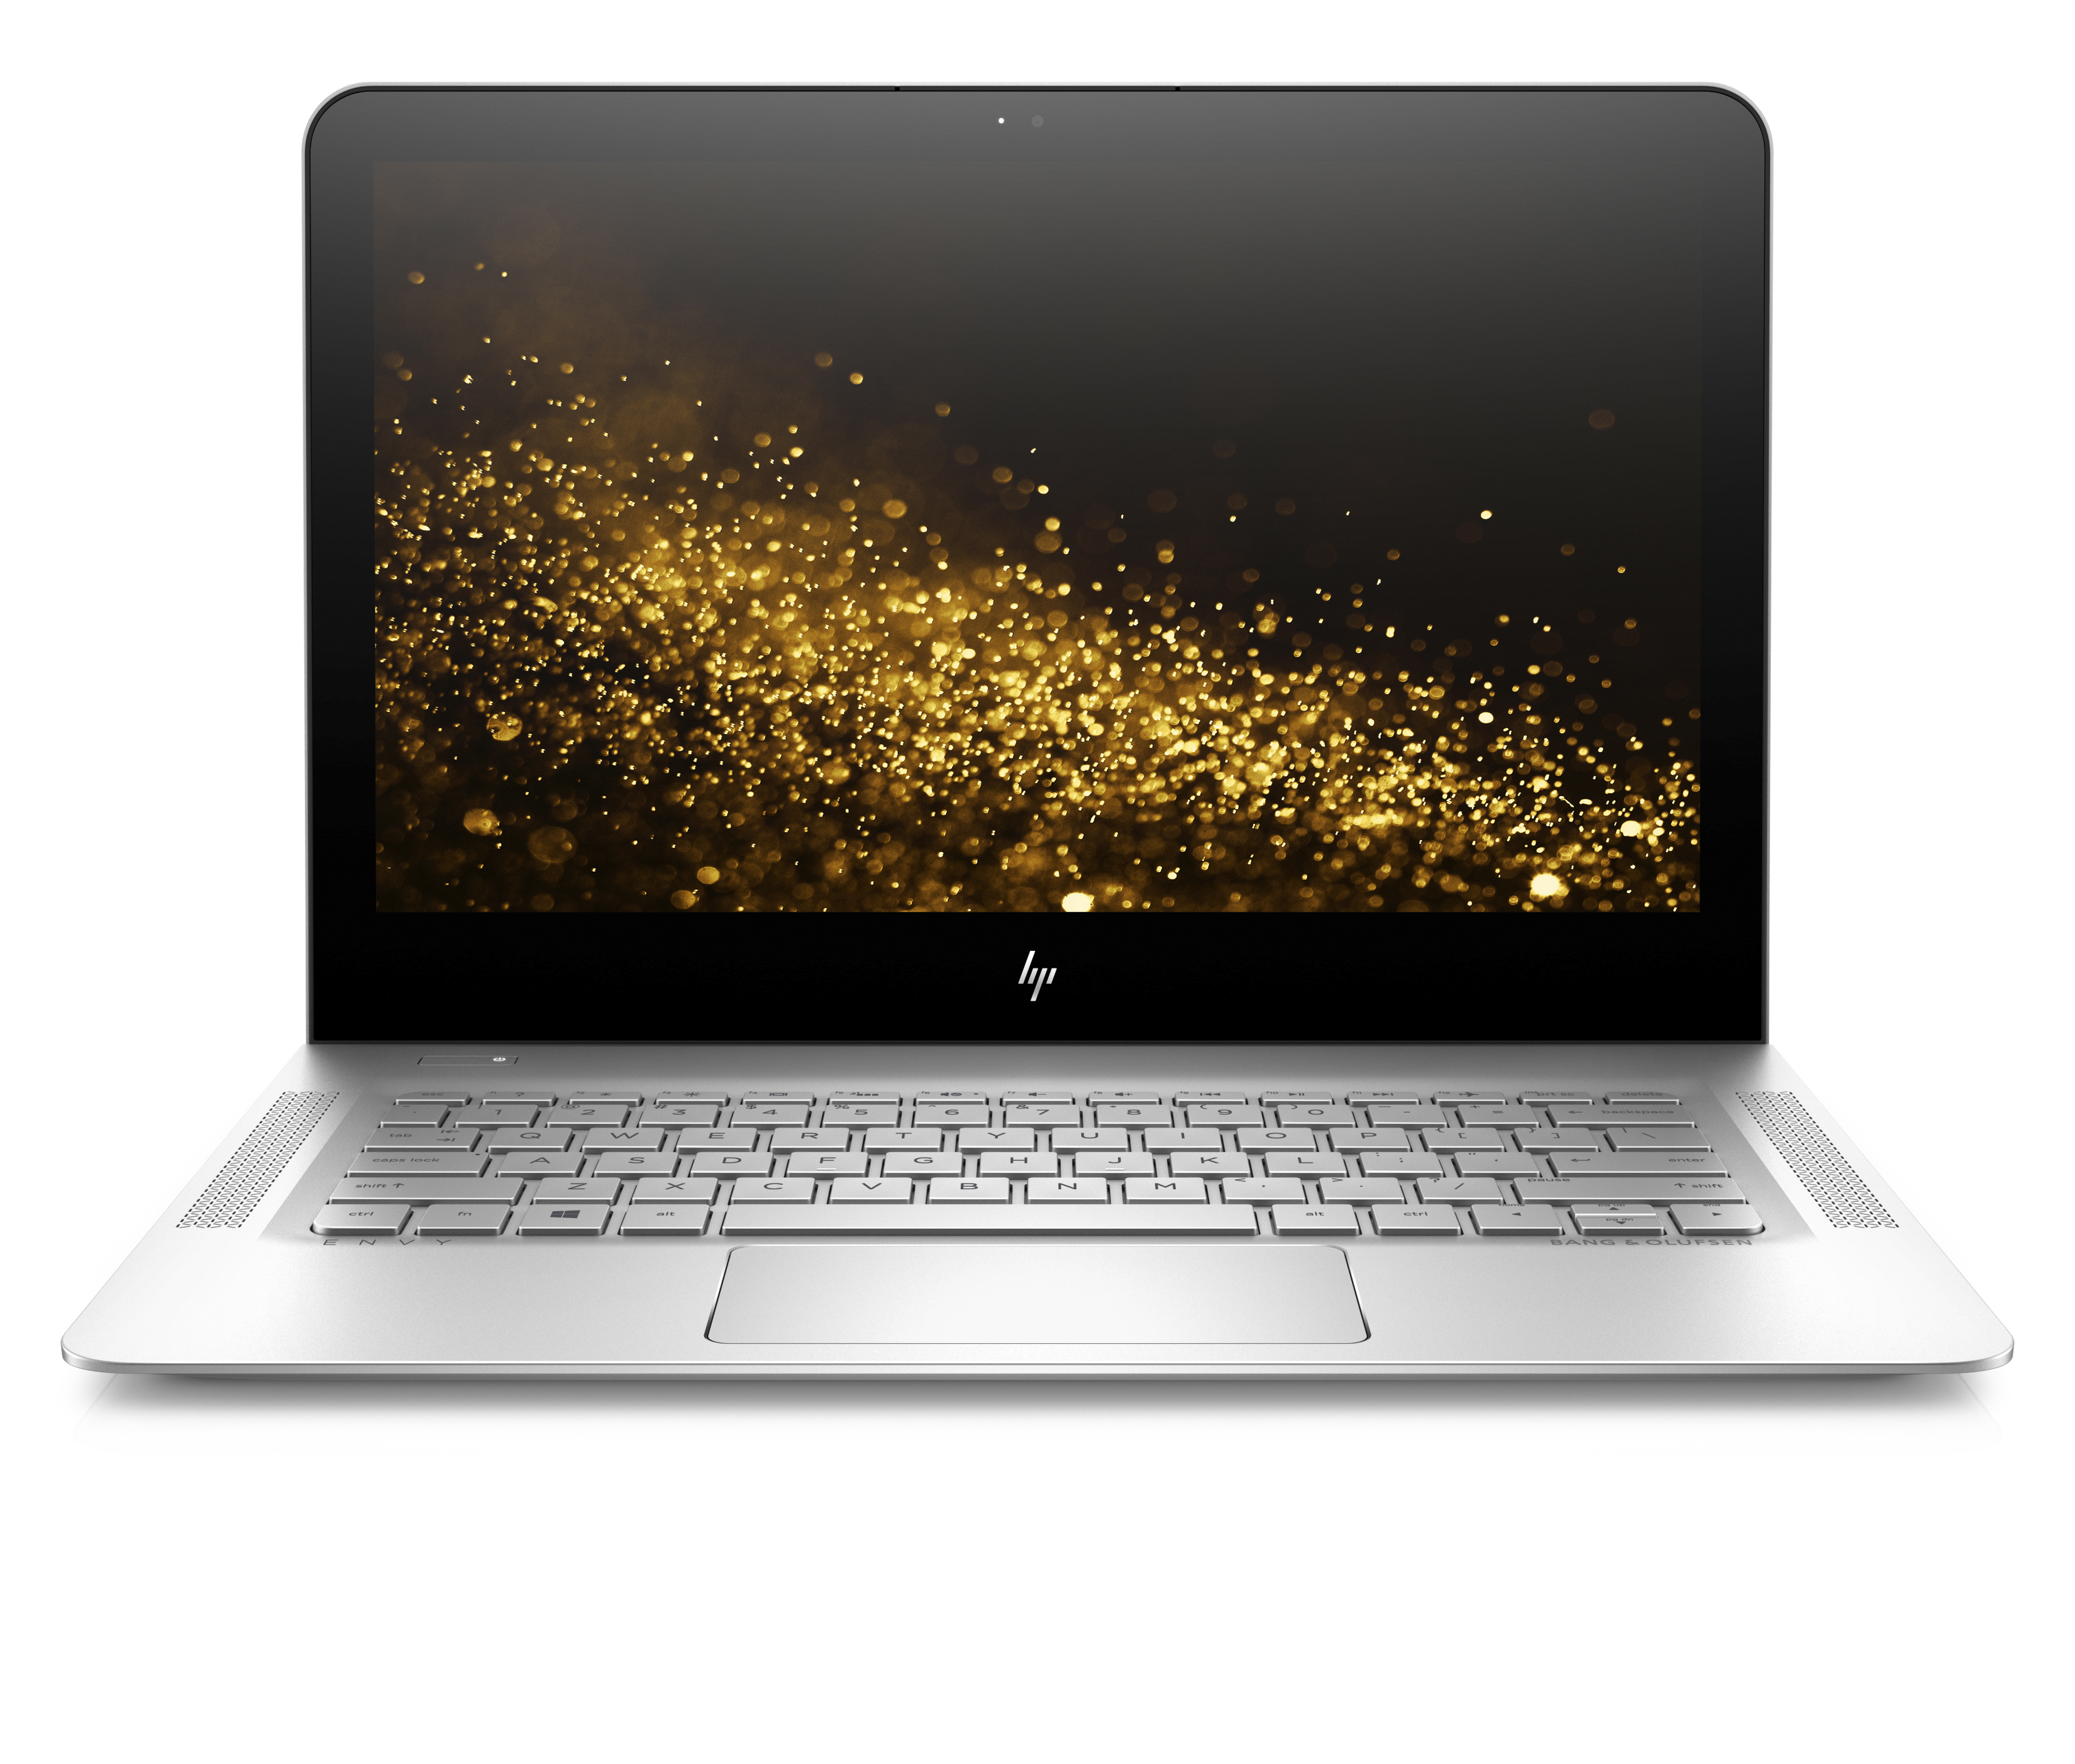 HP ENVY Laptop with Windows 10